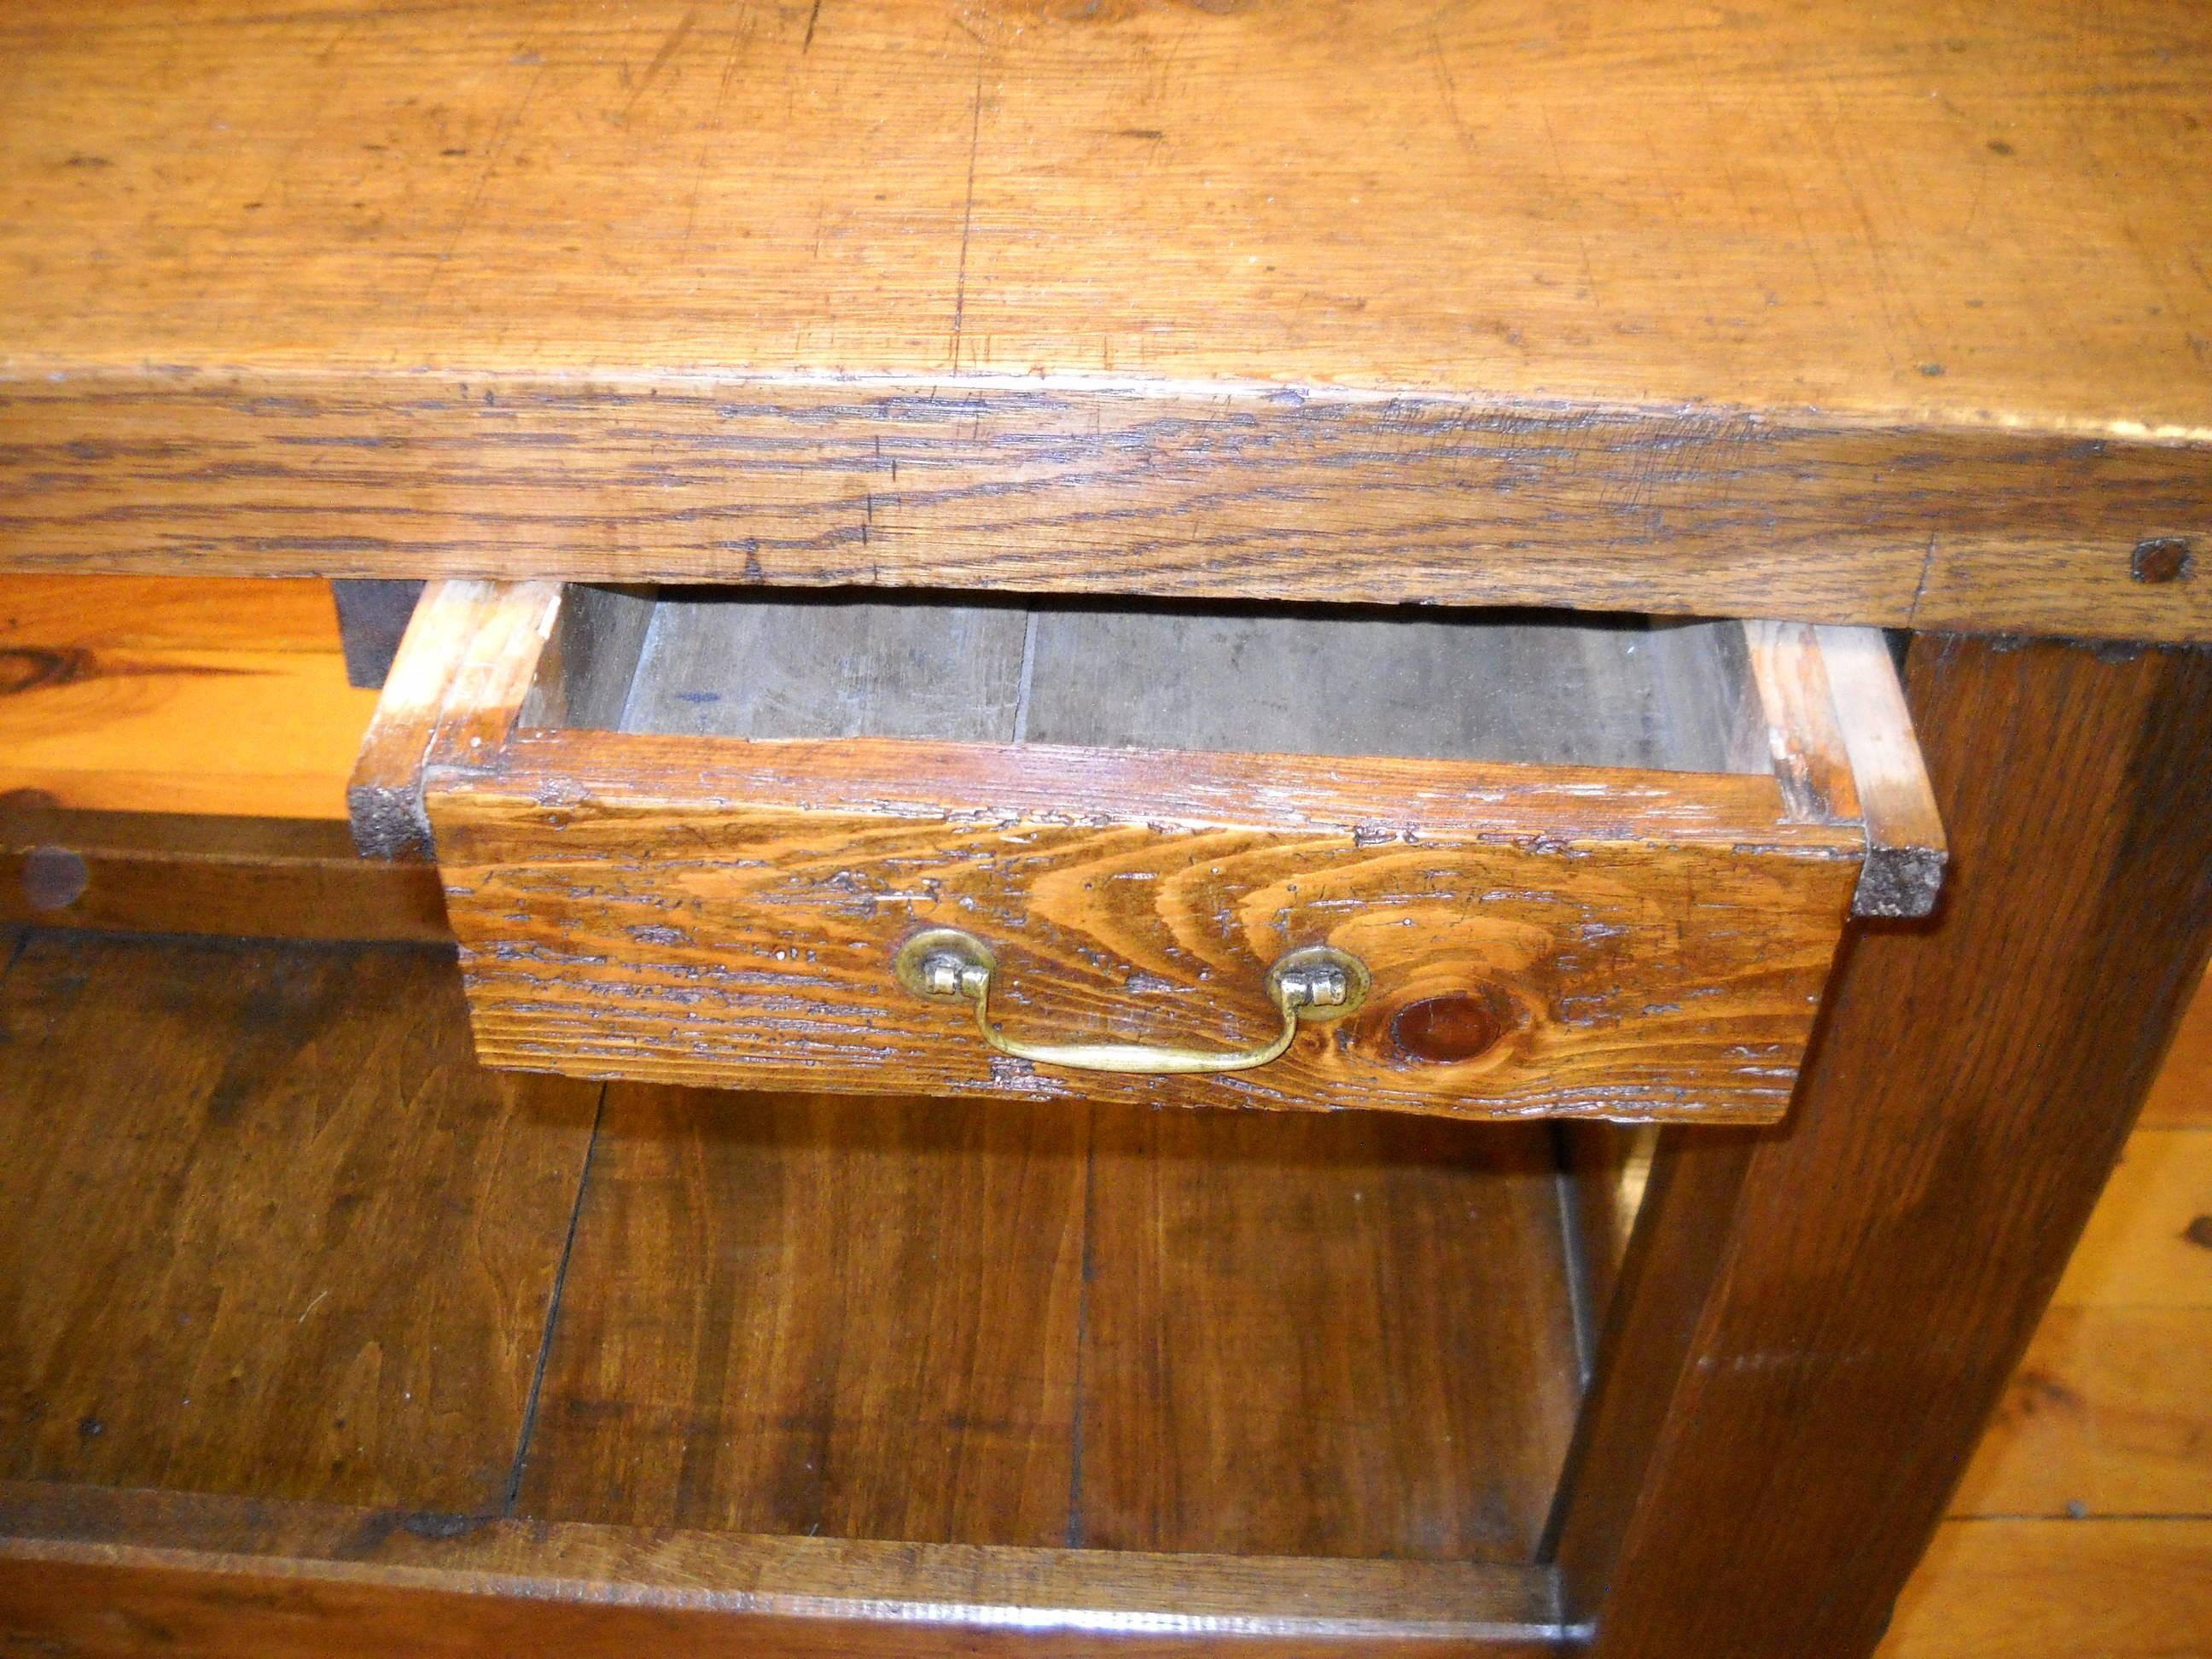 The most beautiful cobblers bench we have every found. Complete with its original vice this oak and chestnut table would be a terrific serving table or can be used freestanding, as it’s finished on all sides. The shelf on the bottom adds terrific